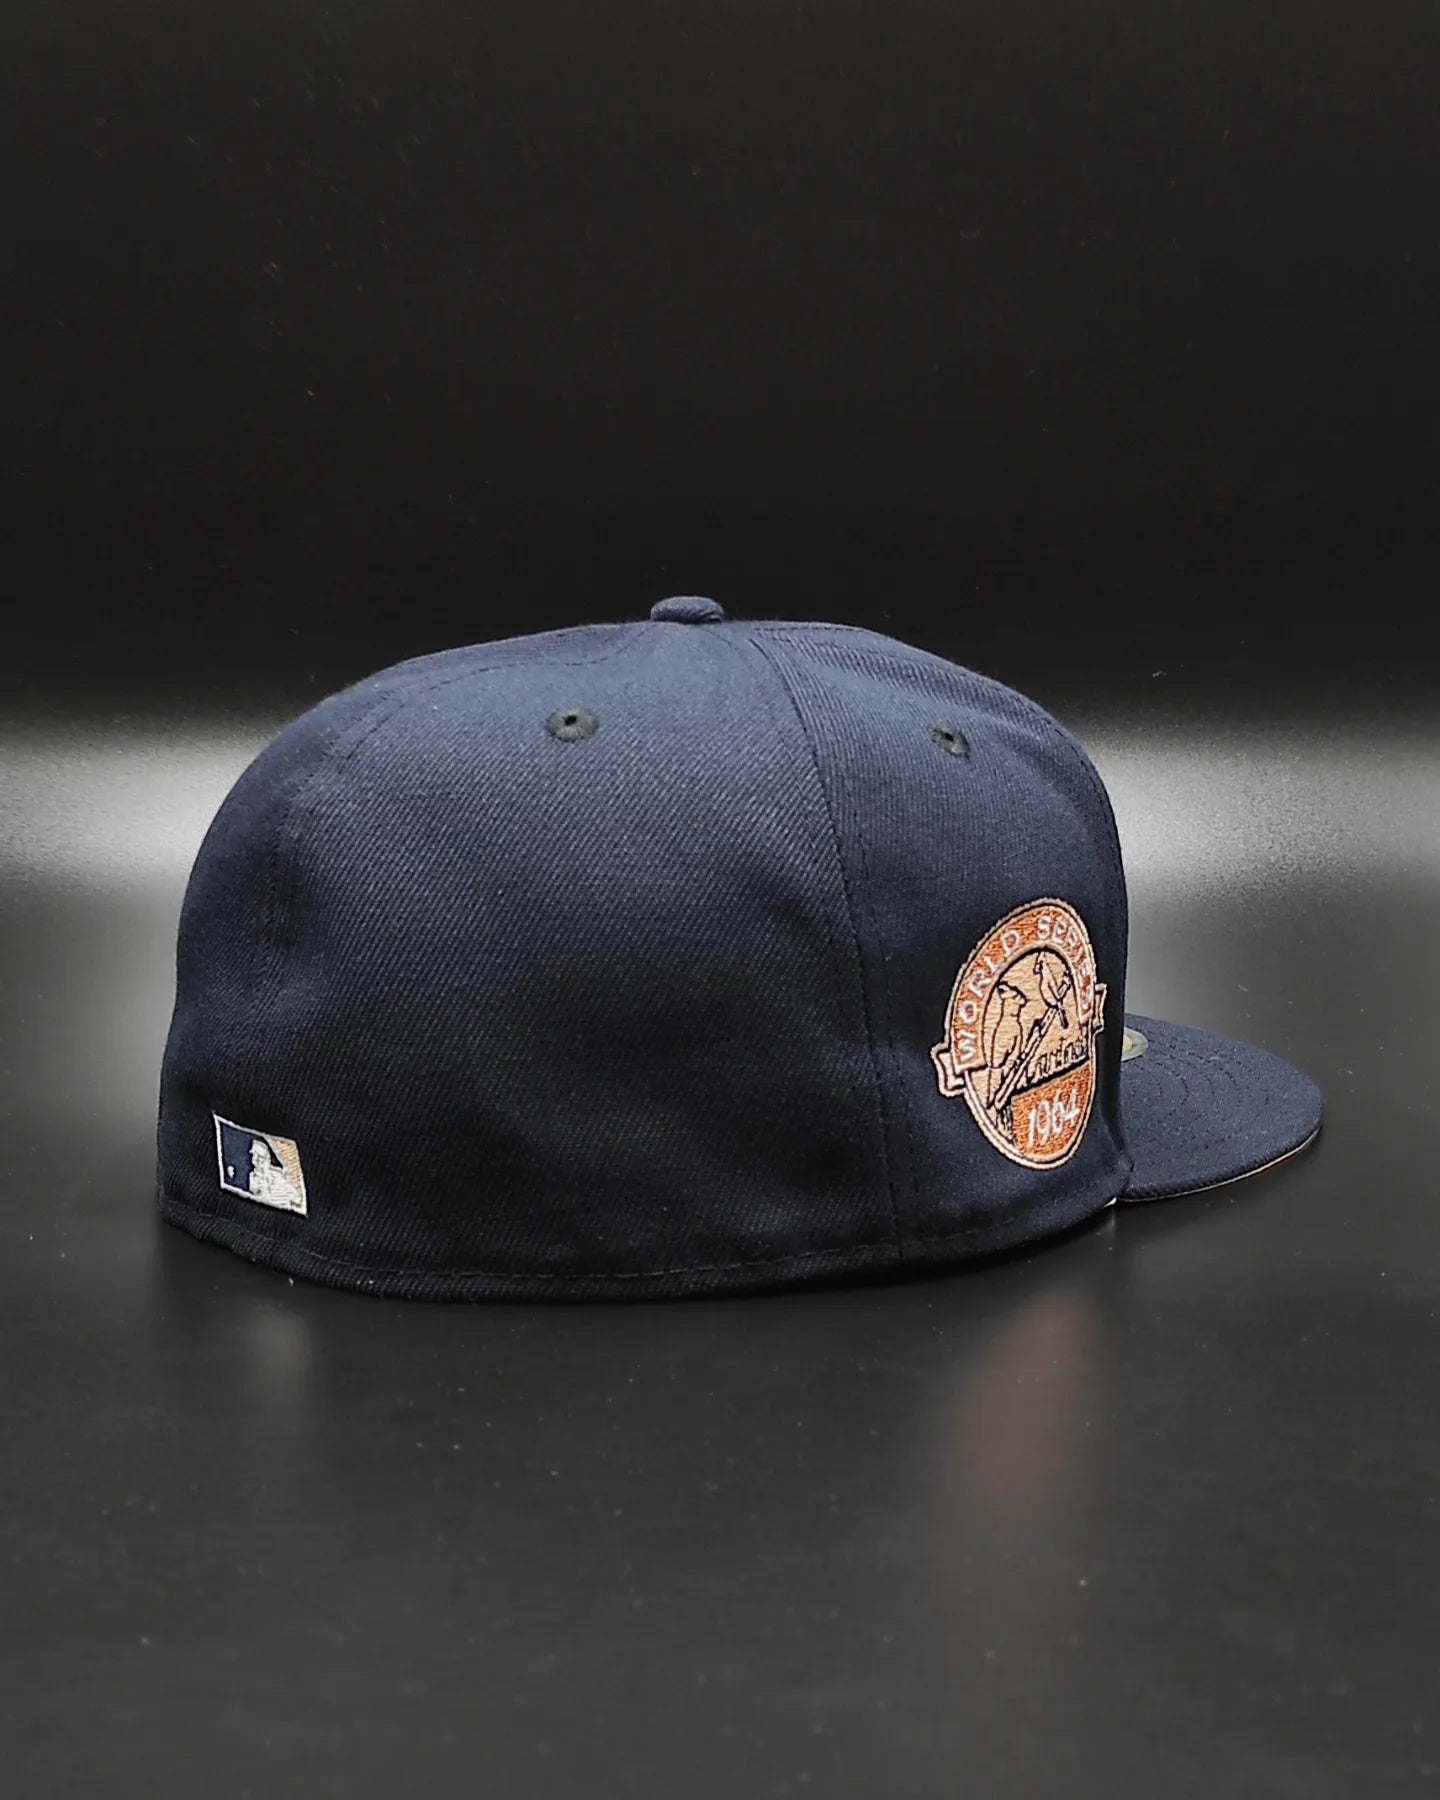 New Era st. louis cardinals world series 1967 navy peach edition 59fifty fitted cap